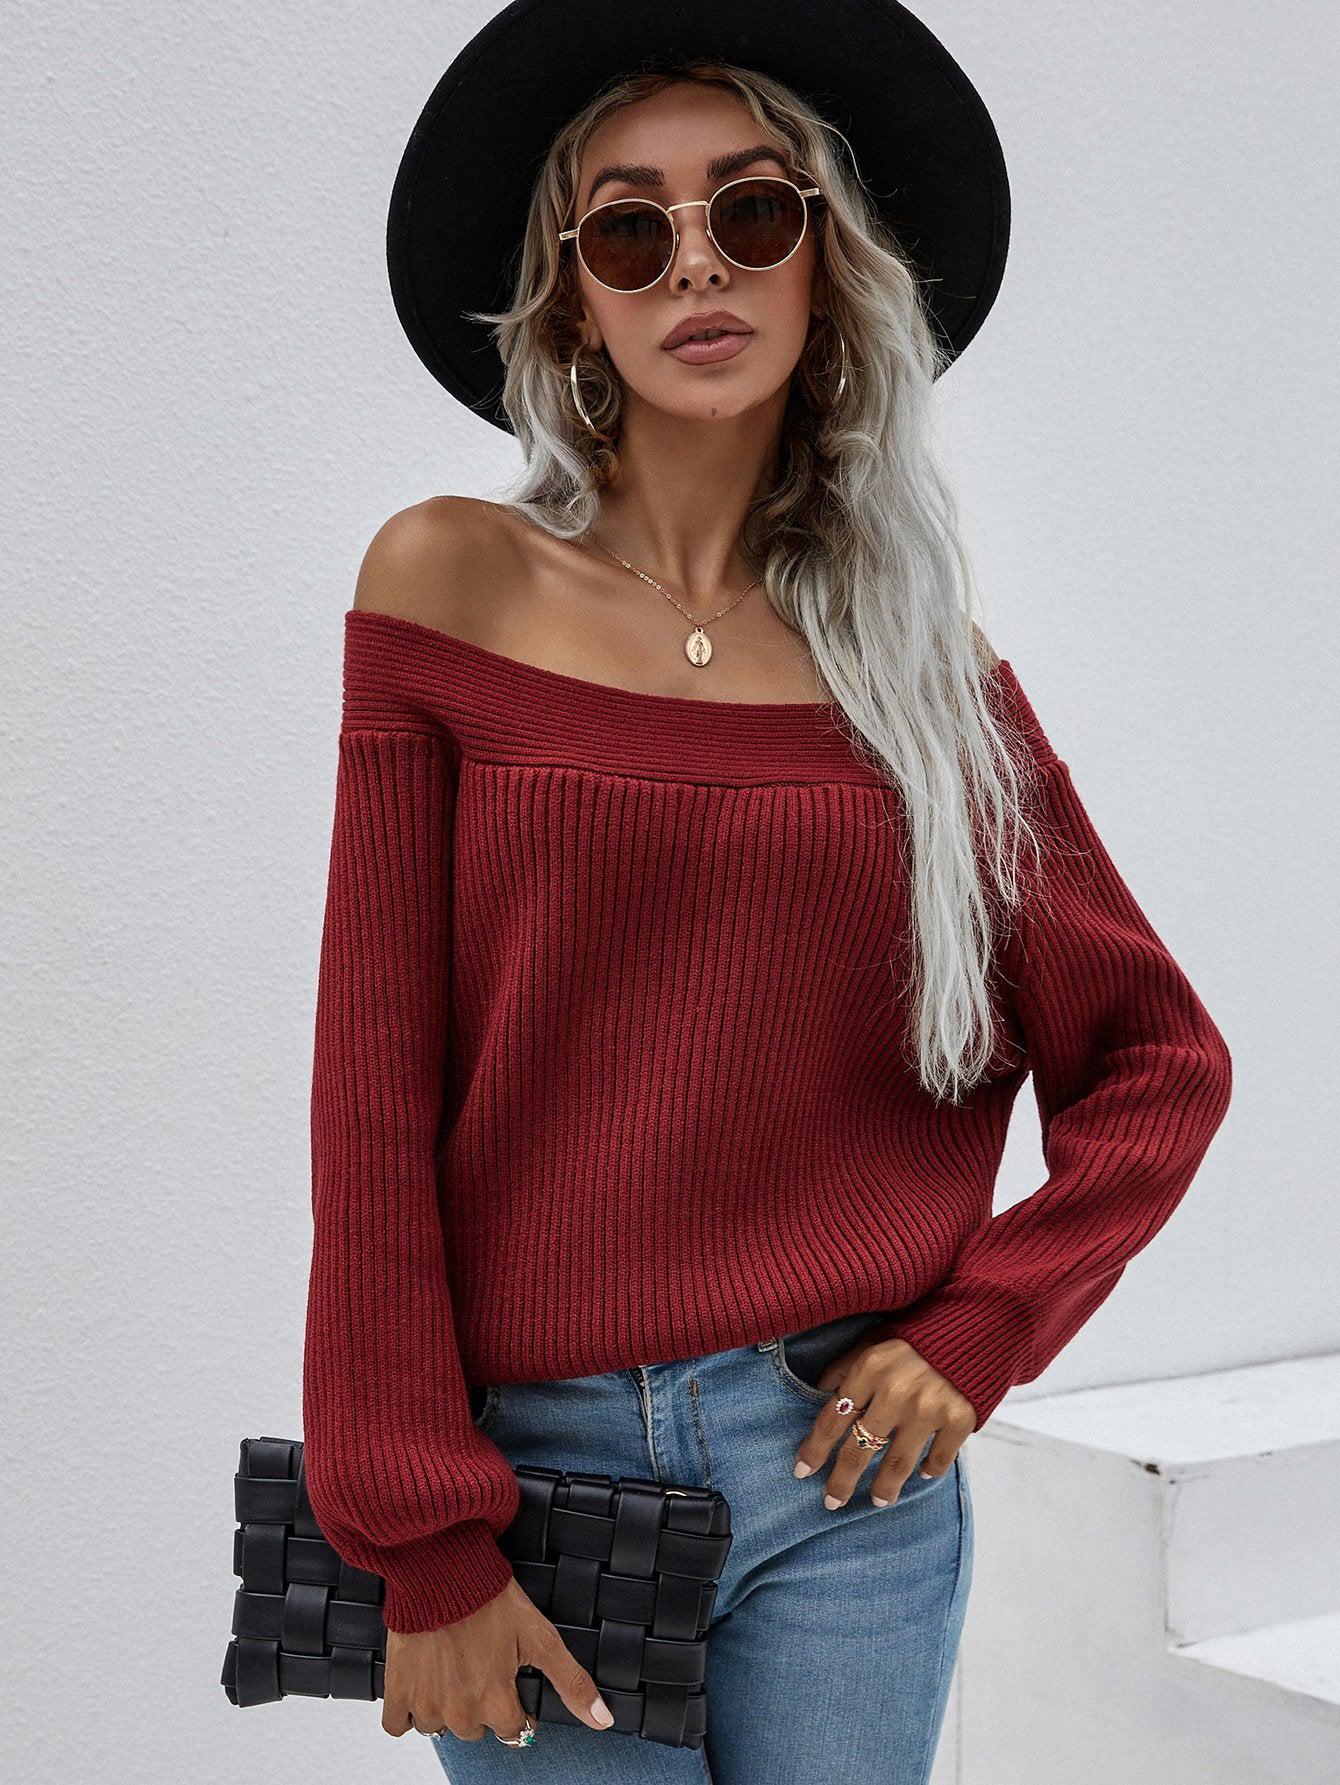 Off-Shoulder Rib-Knit Sweater BLUE ZONE PLANET